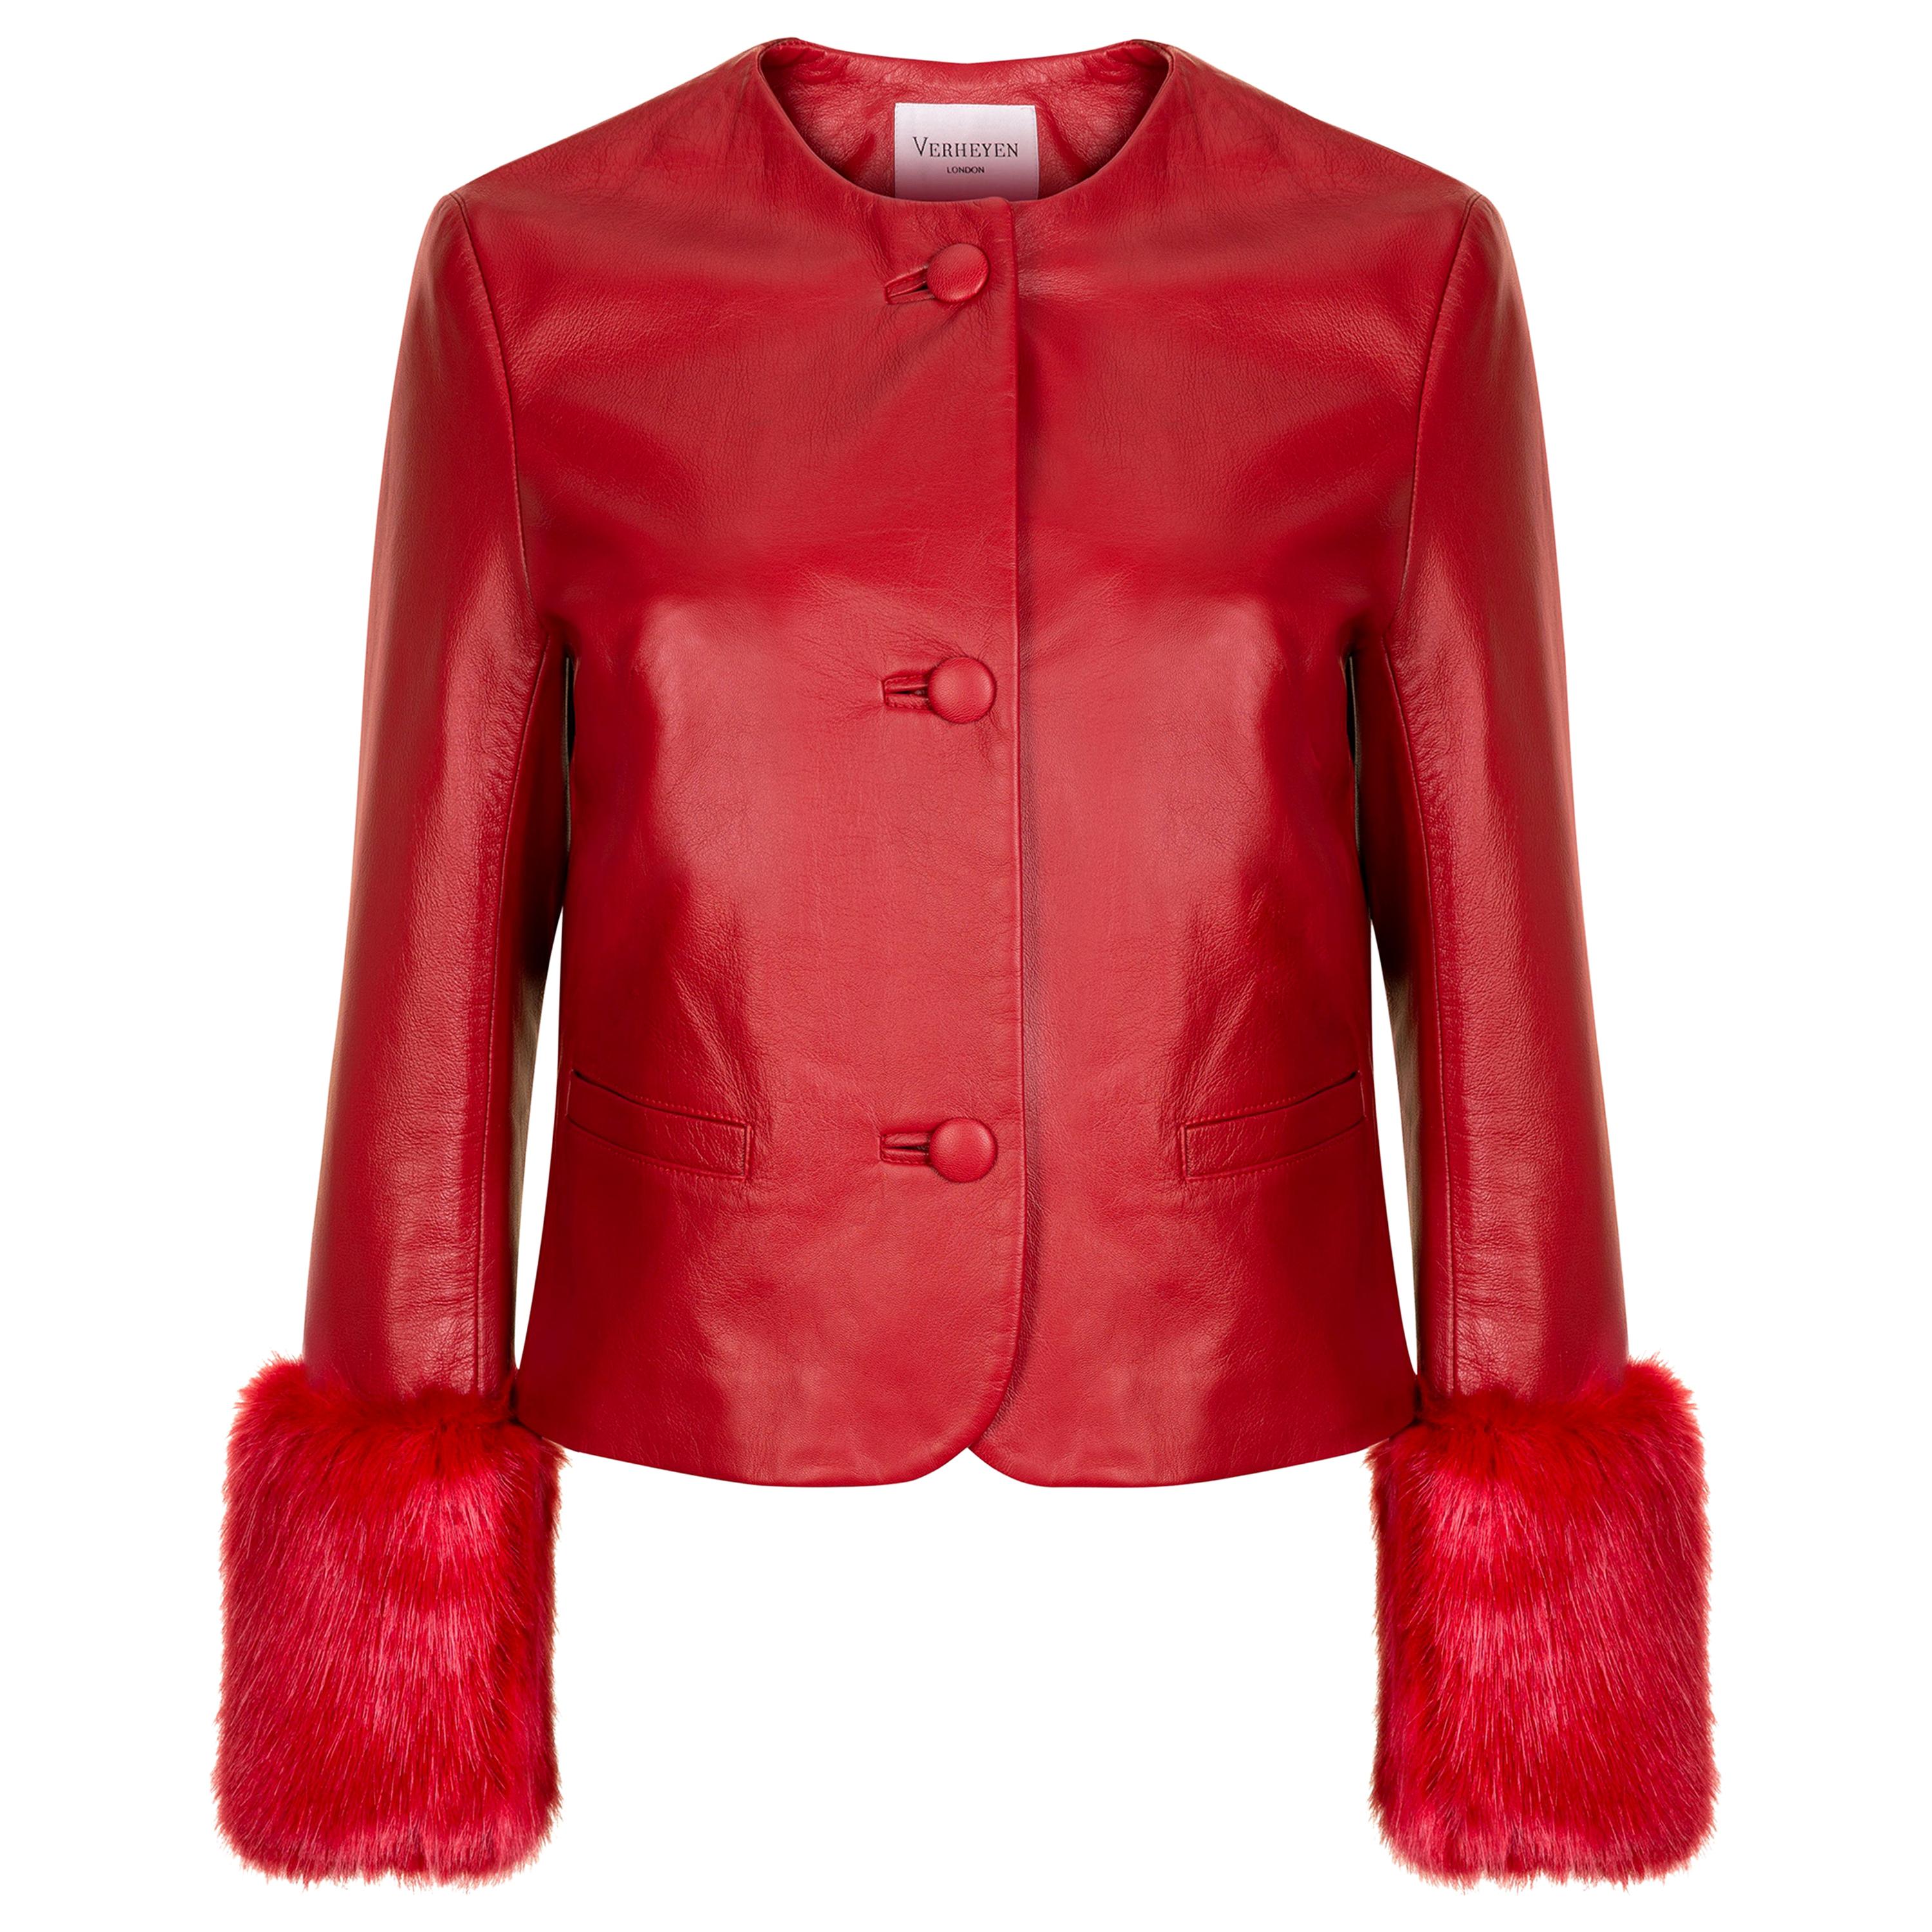 Verheyen Vita Cropped Jacket in Red Leather with Faux Fur - Size uk 10 For Sale